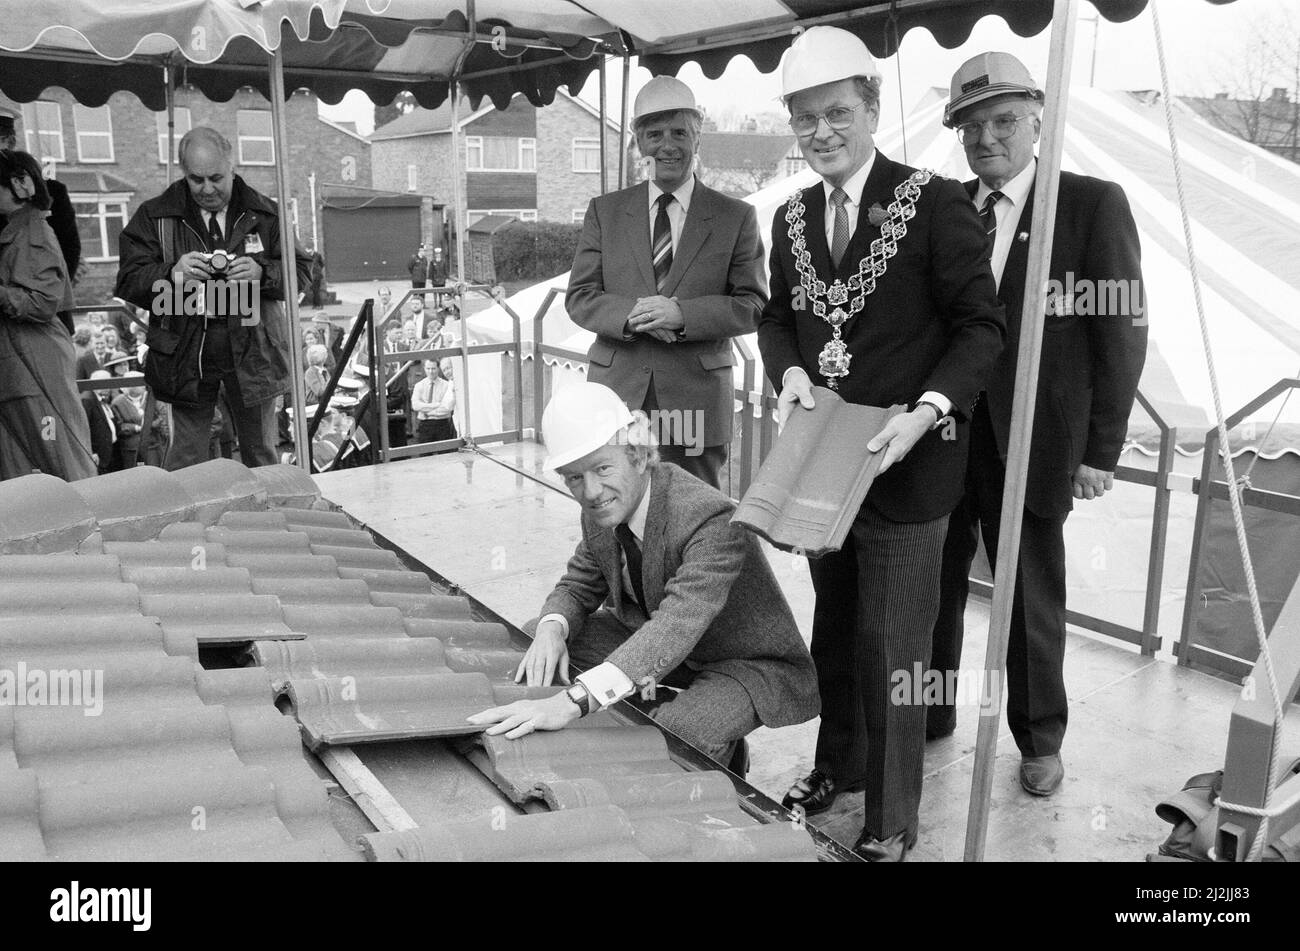 Acorns Children's Hospice. Topping Out Ceremony, with guest of honour Lord Lichfield, Patrick Anson, 5th Earl of Lichfield, 8th March 1988. Stock Photo